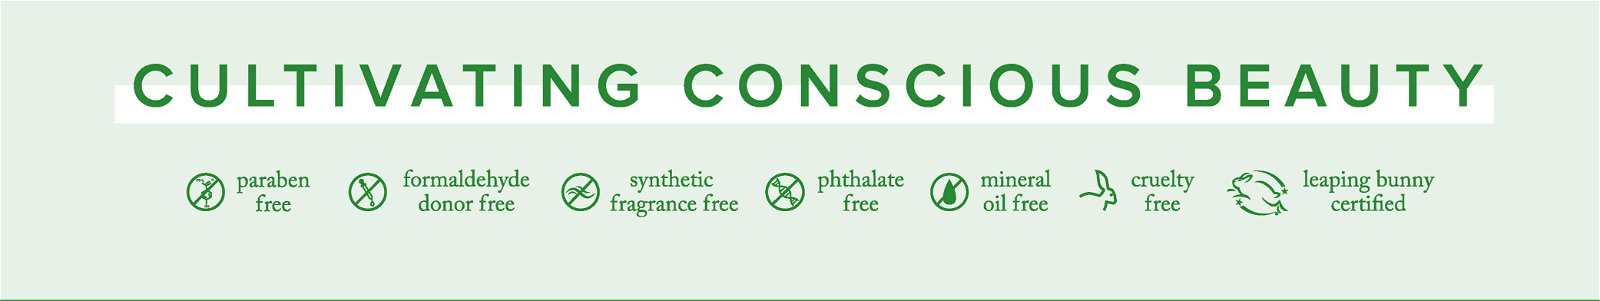 Cultivating Conscious Beauty